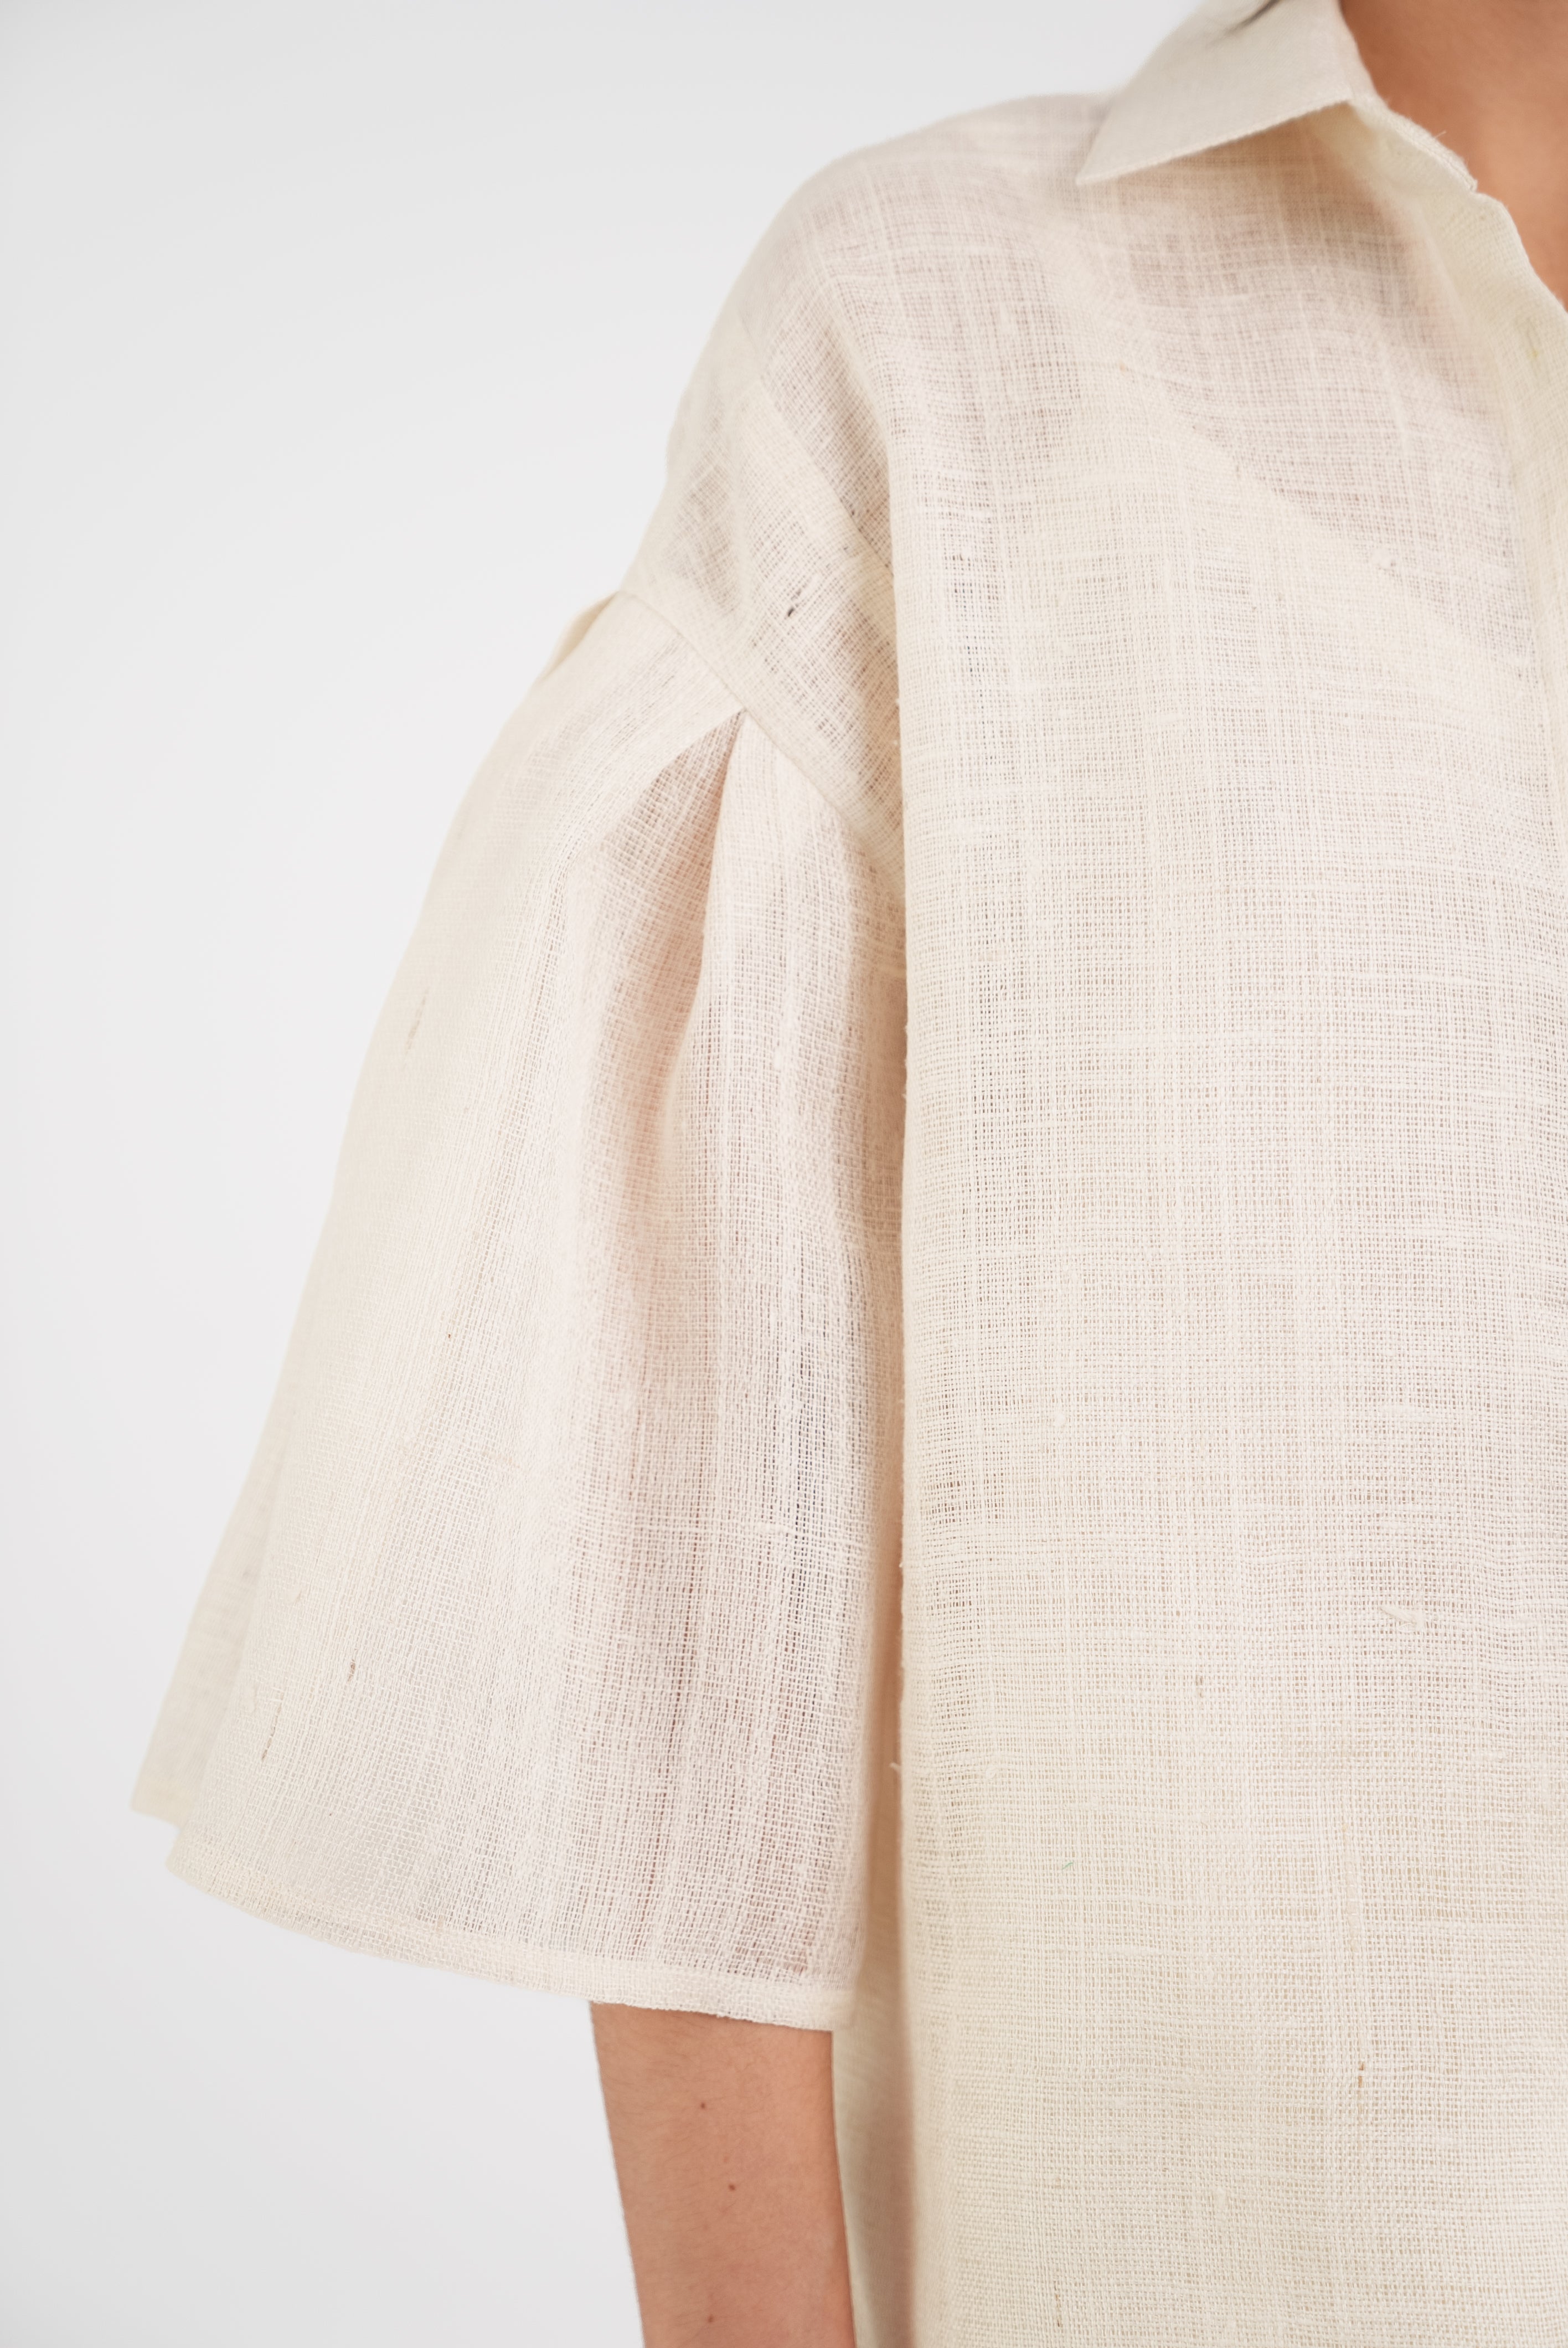 Pleat Blouse in Vintage Japanese Raw Ivory Silk